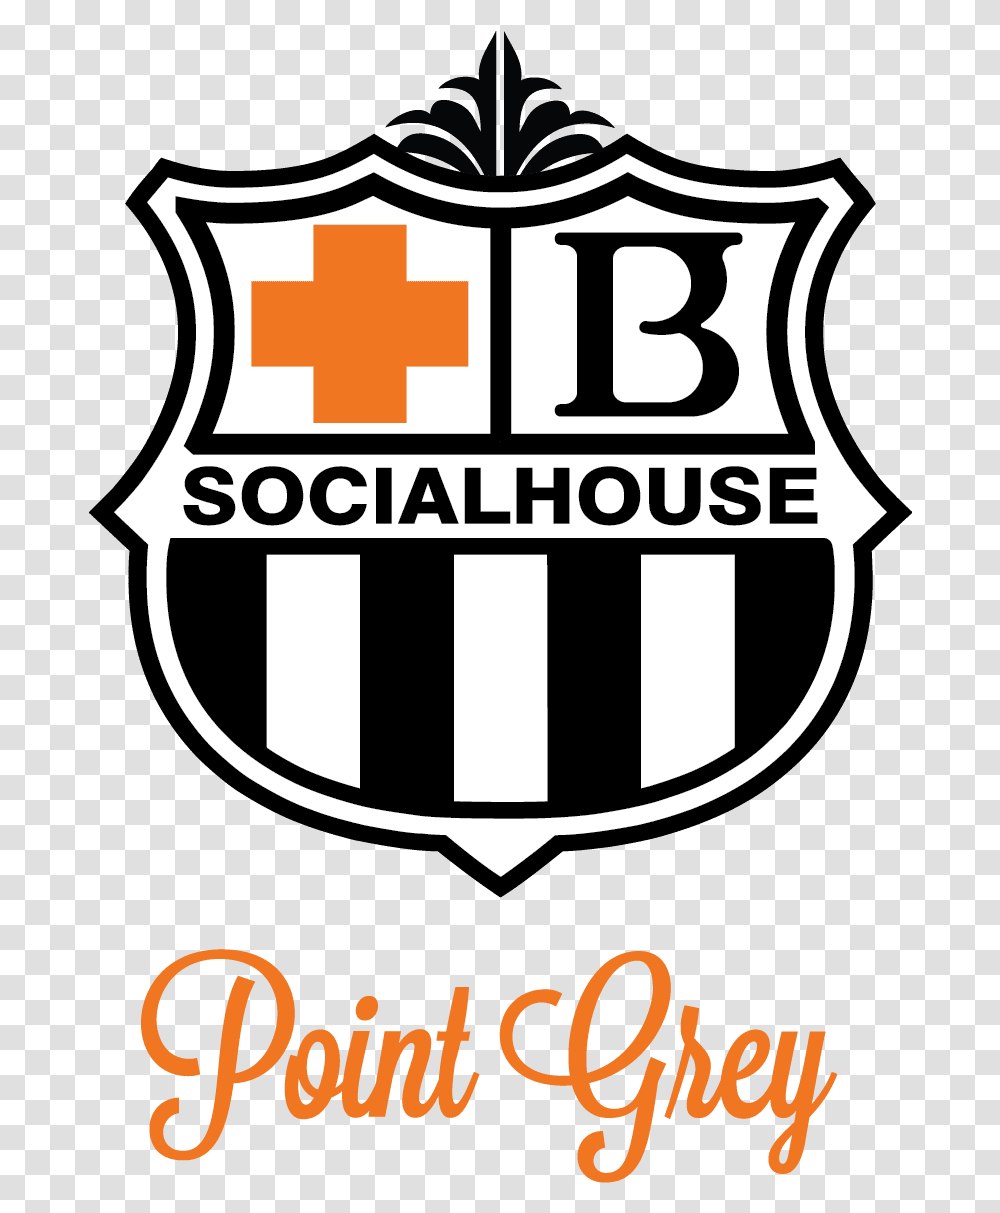 Browns Socialhouse Manning Town Centre Browns Social House Logo, Symbol, Trademark, Poster, Advertisement Transparent Png